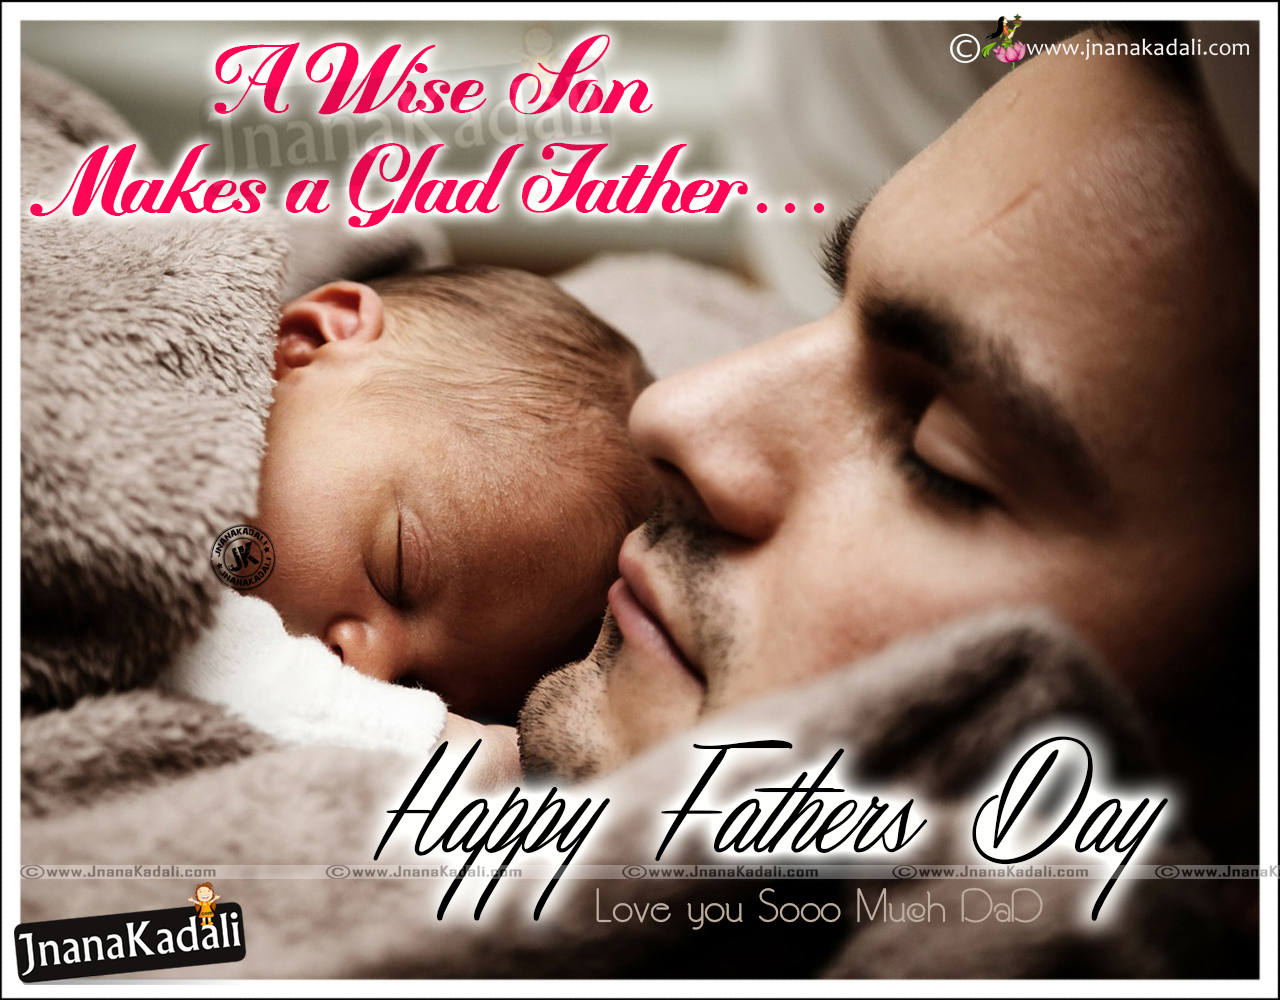 Love Dad Quotes Picture and Nice Inspiring Father's Day Quotes. JNANA KADALI.COM. Telugu Quotes. English quotes. Hindi quotes. Tamil quotes. Dharmasandehalu